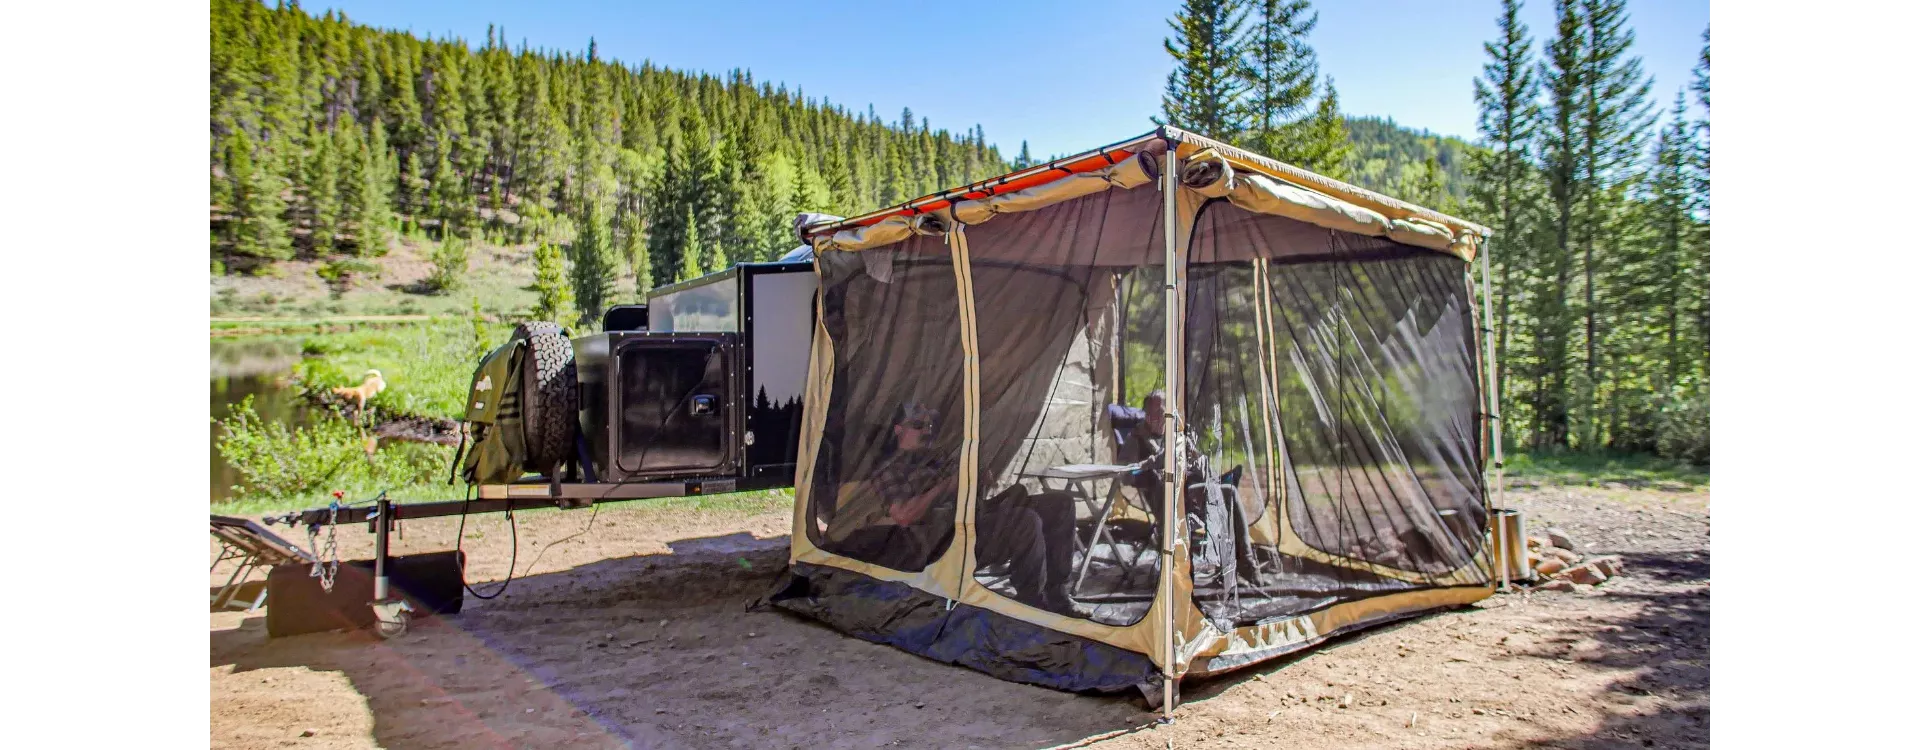 Awnings and Rooms for the Boreas Adventure Camper Trailer